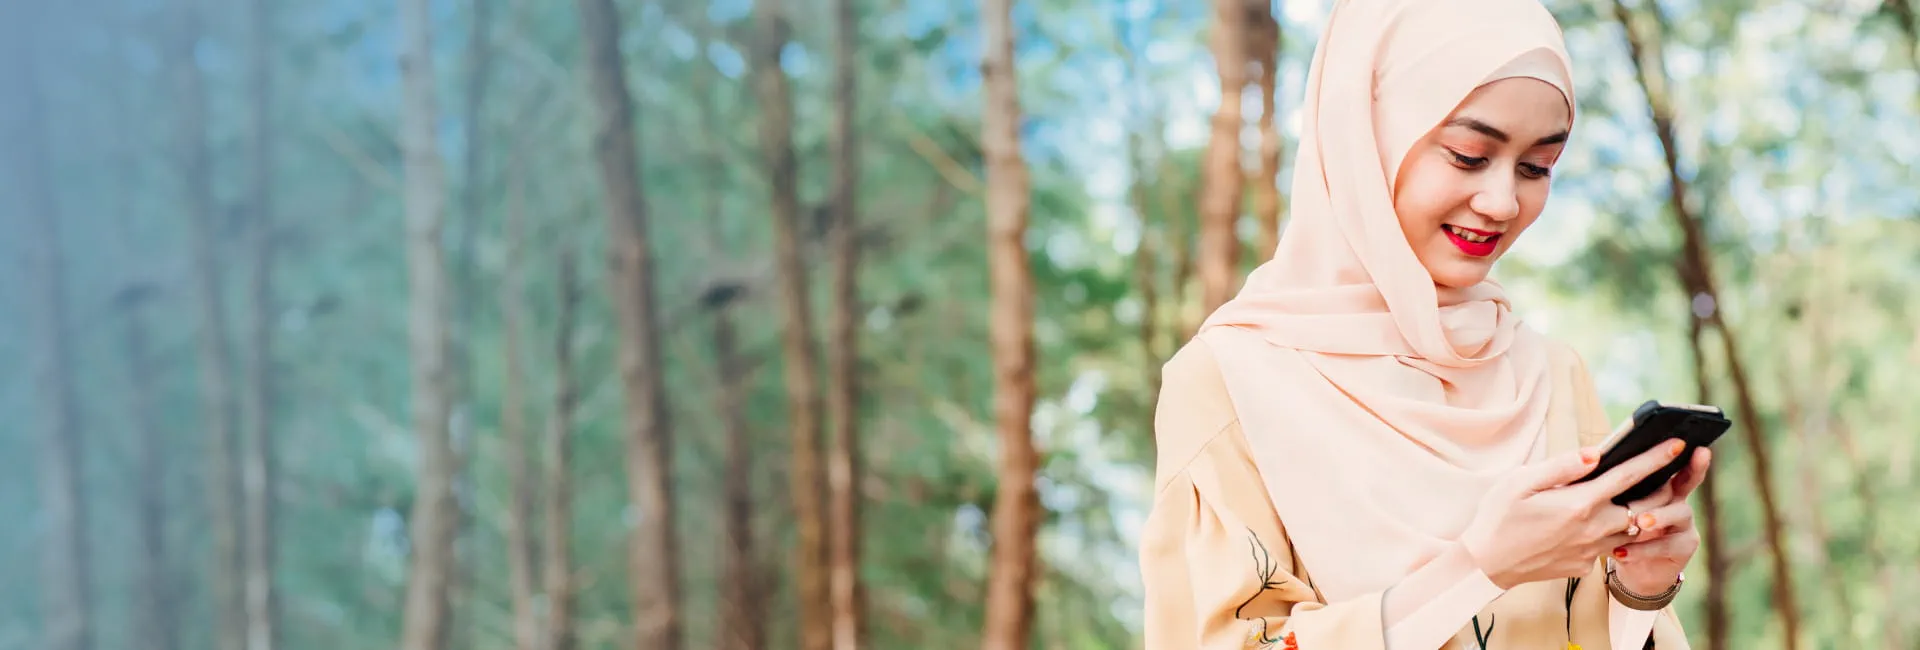 Islamic lady walking in the forest using her phone